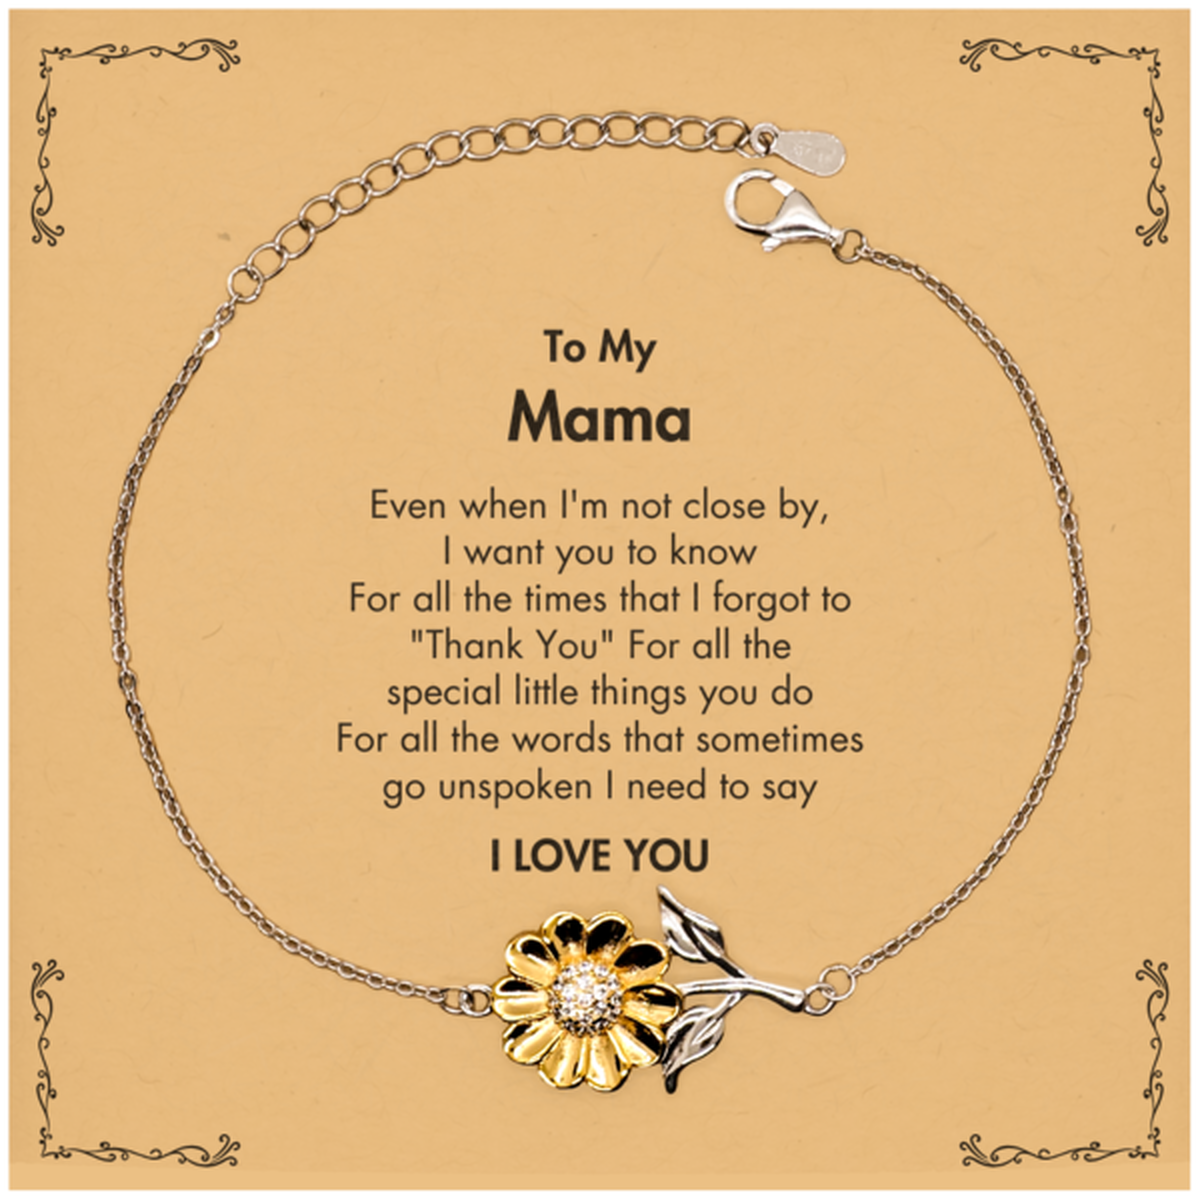 Thank You Gifts for Mama, Keepsake Sunflower Bracelet Gifts for Mama Birthday Mother's day Father's Day Mama For all the words That sometimes go unspoken I need to say I LOVE YOU